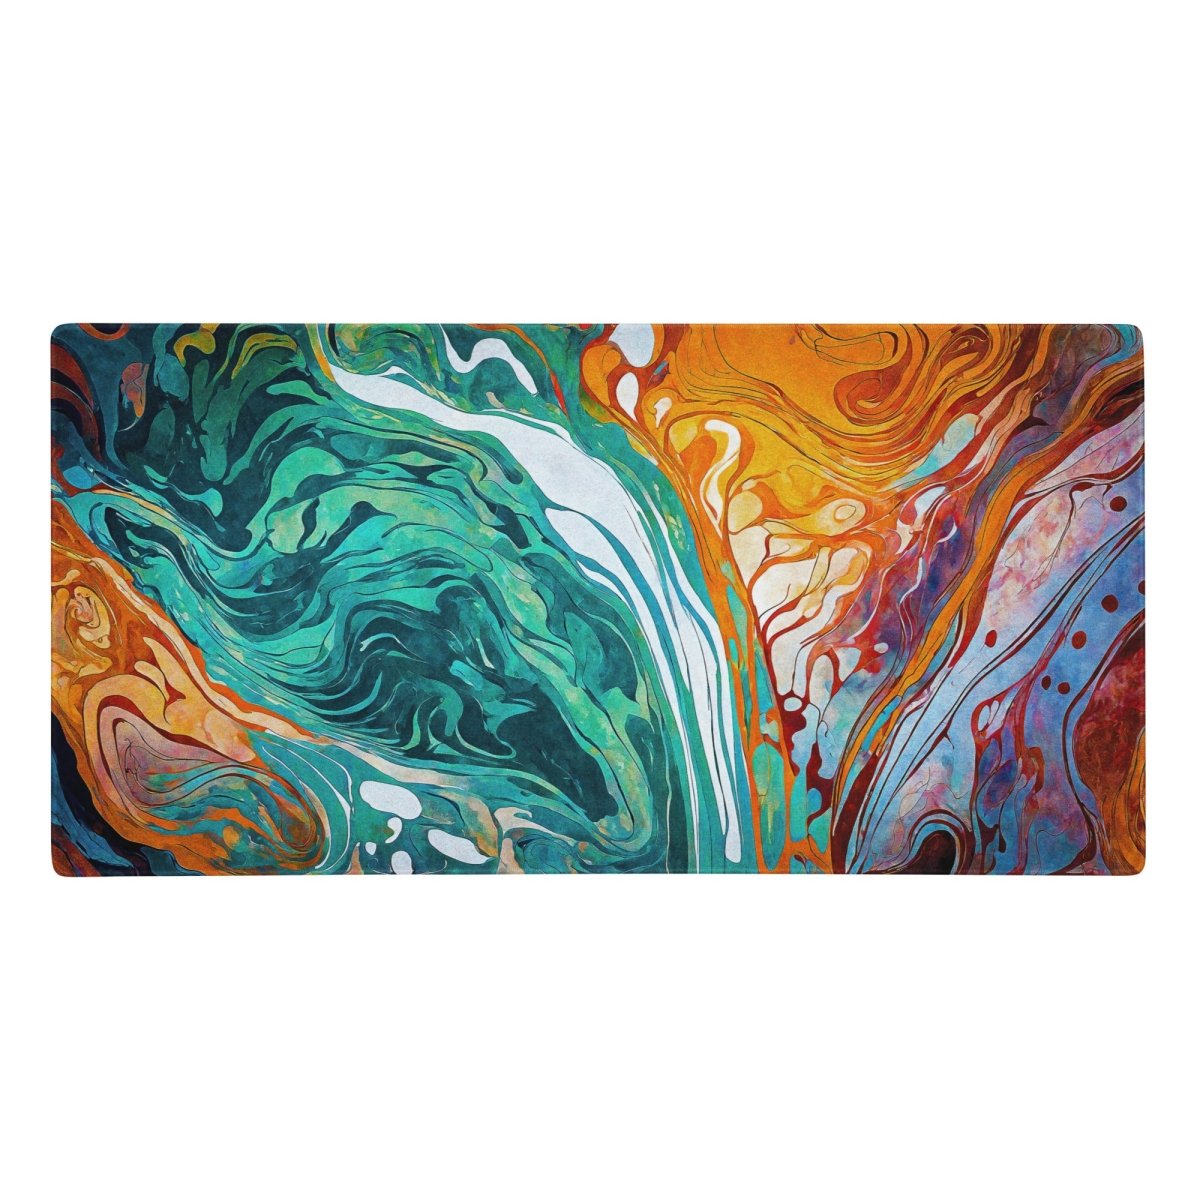 Stained current - Gaming mouse pad - Ever colorful